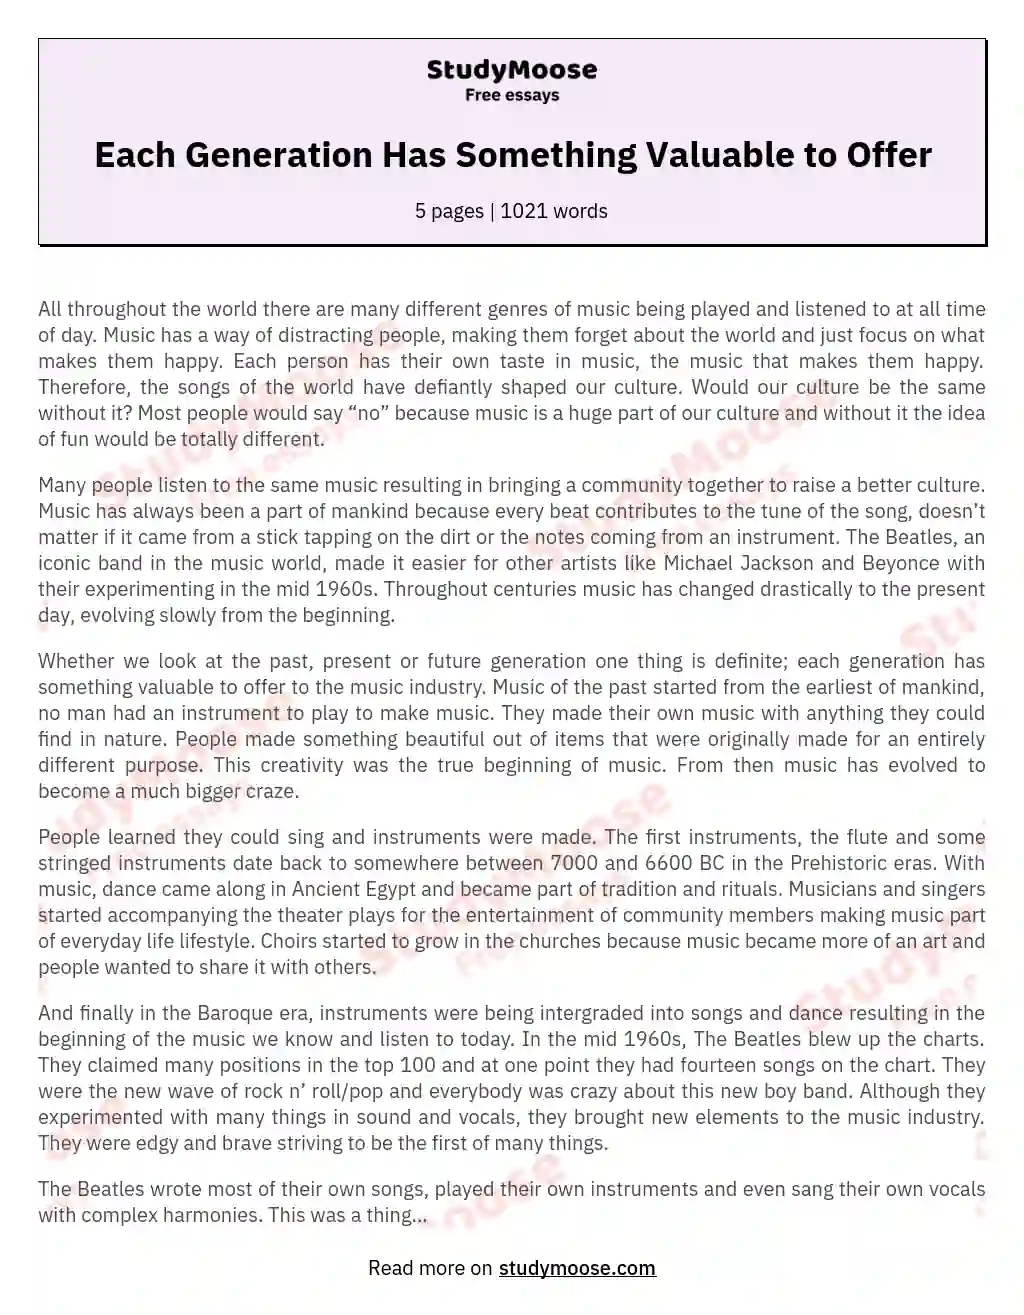 Each Generation Has Something Valuable to Offer essay